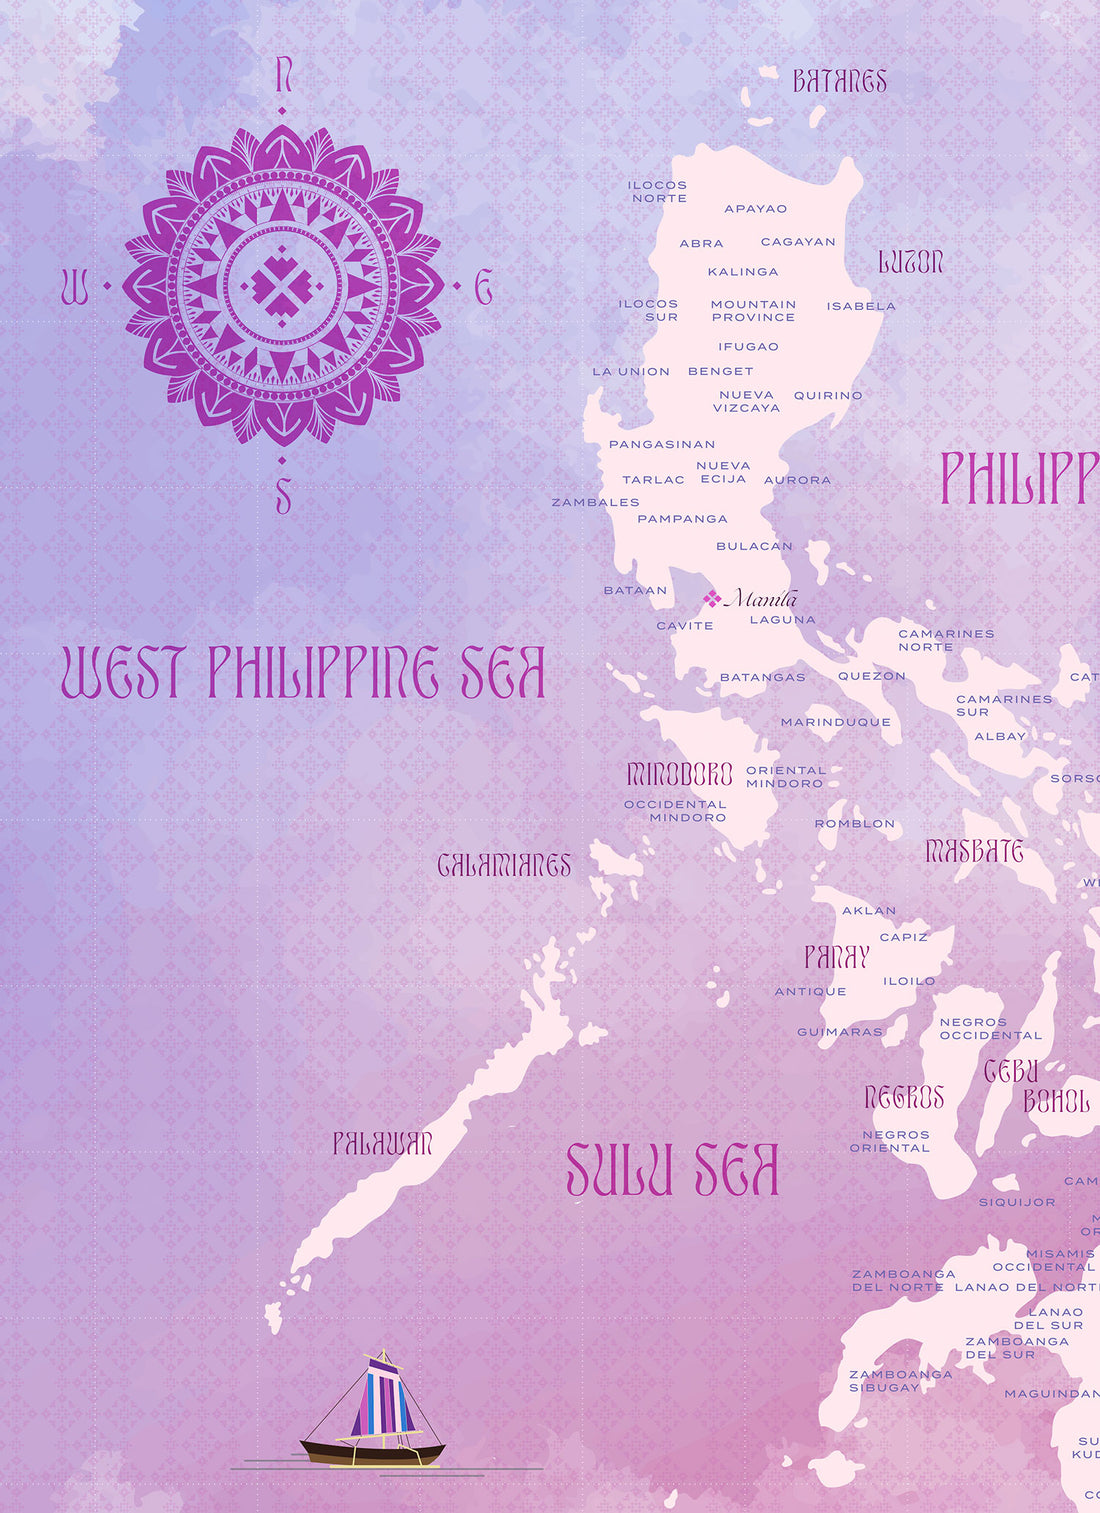 CMANGO Design Map of the Philippines, Ube, Compass Detail